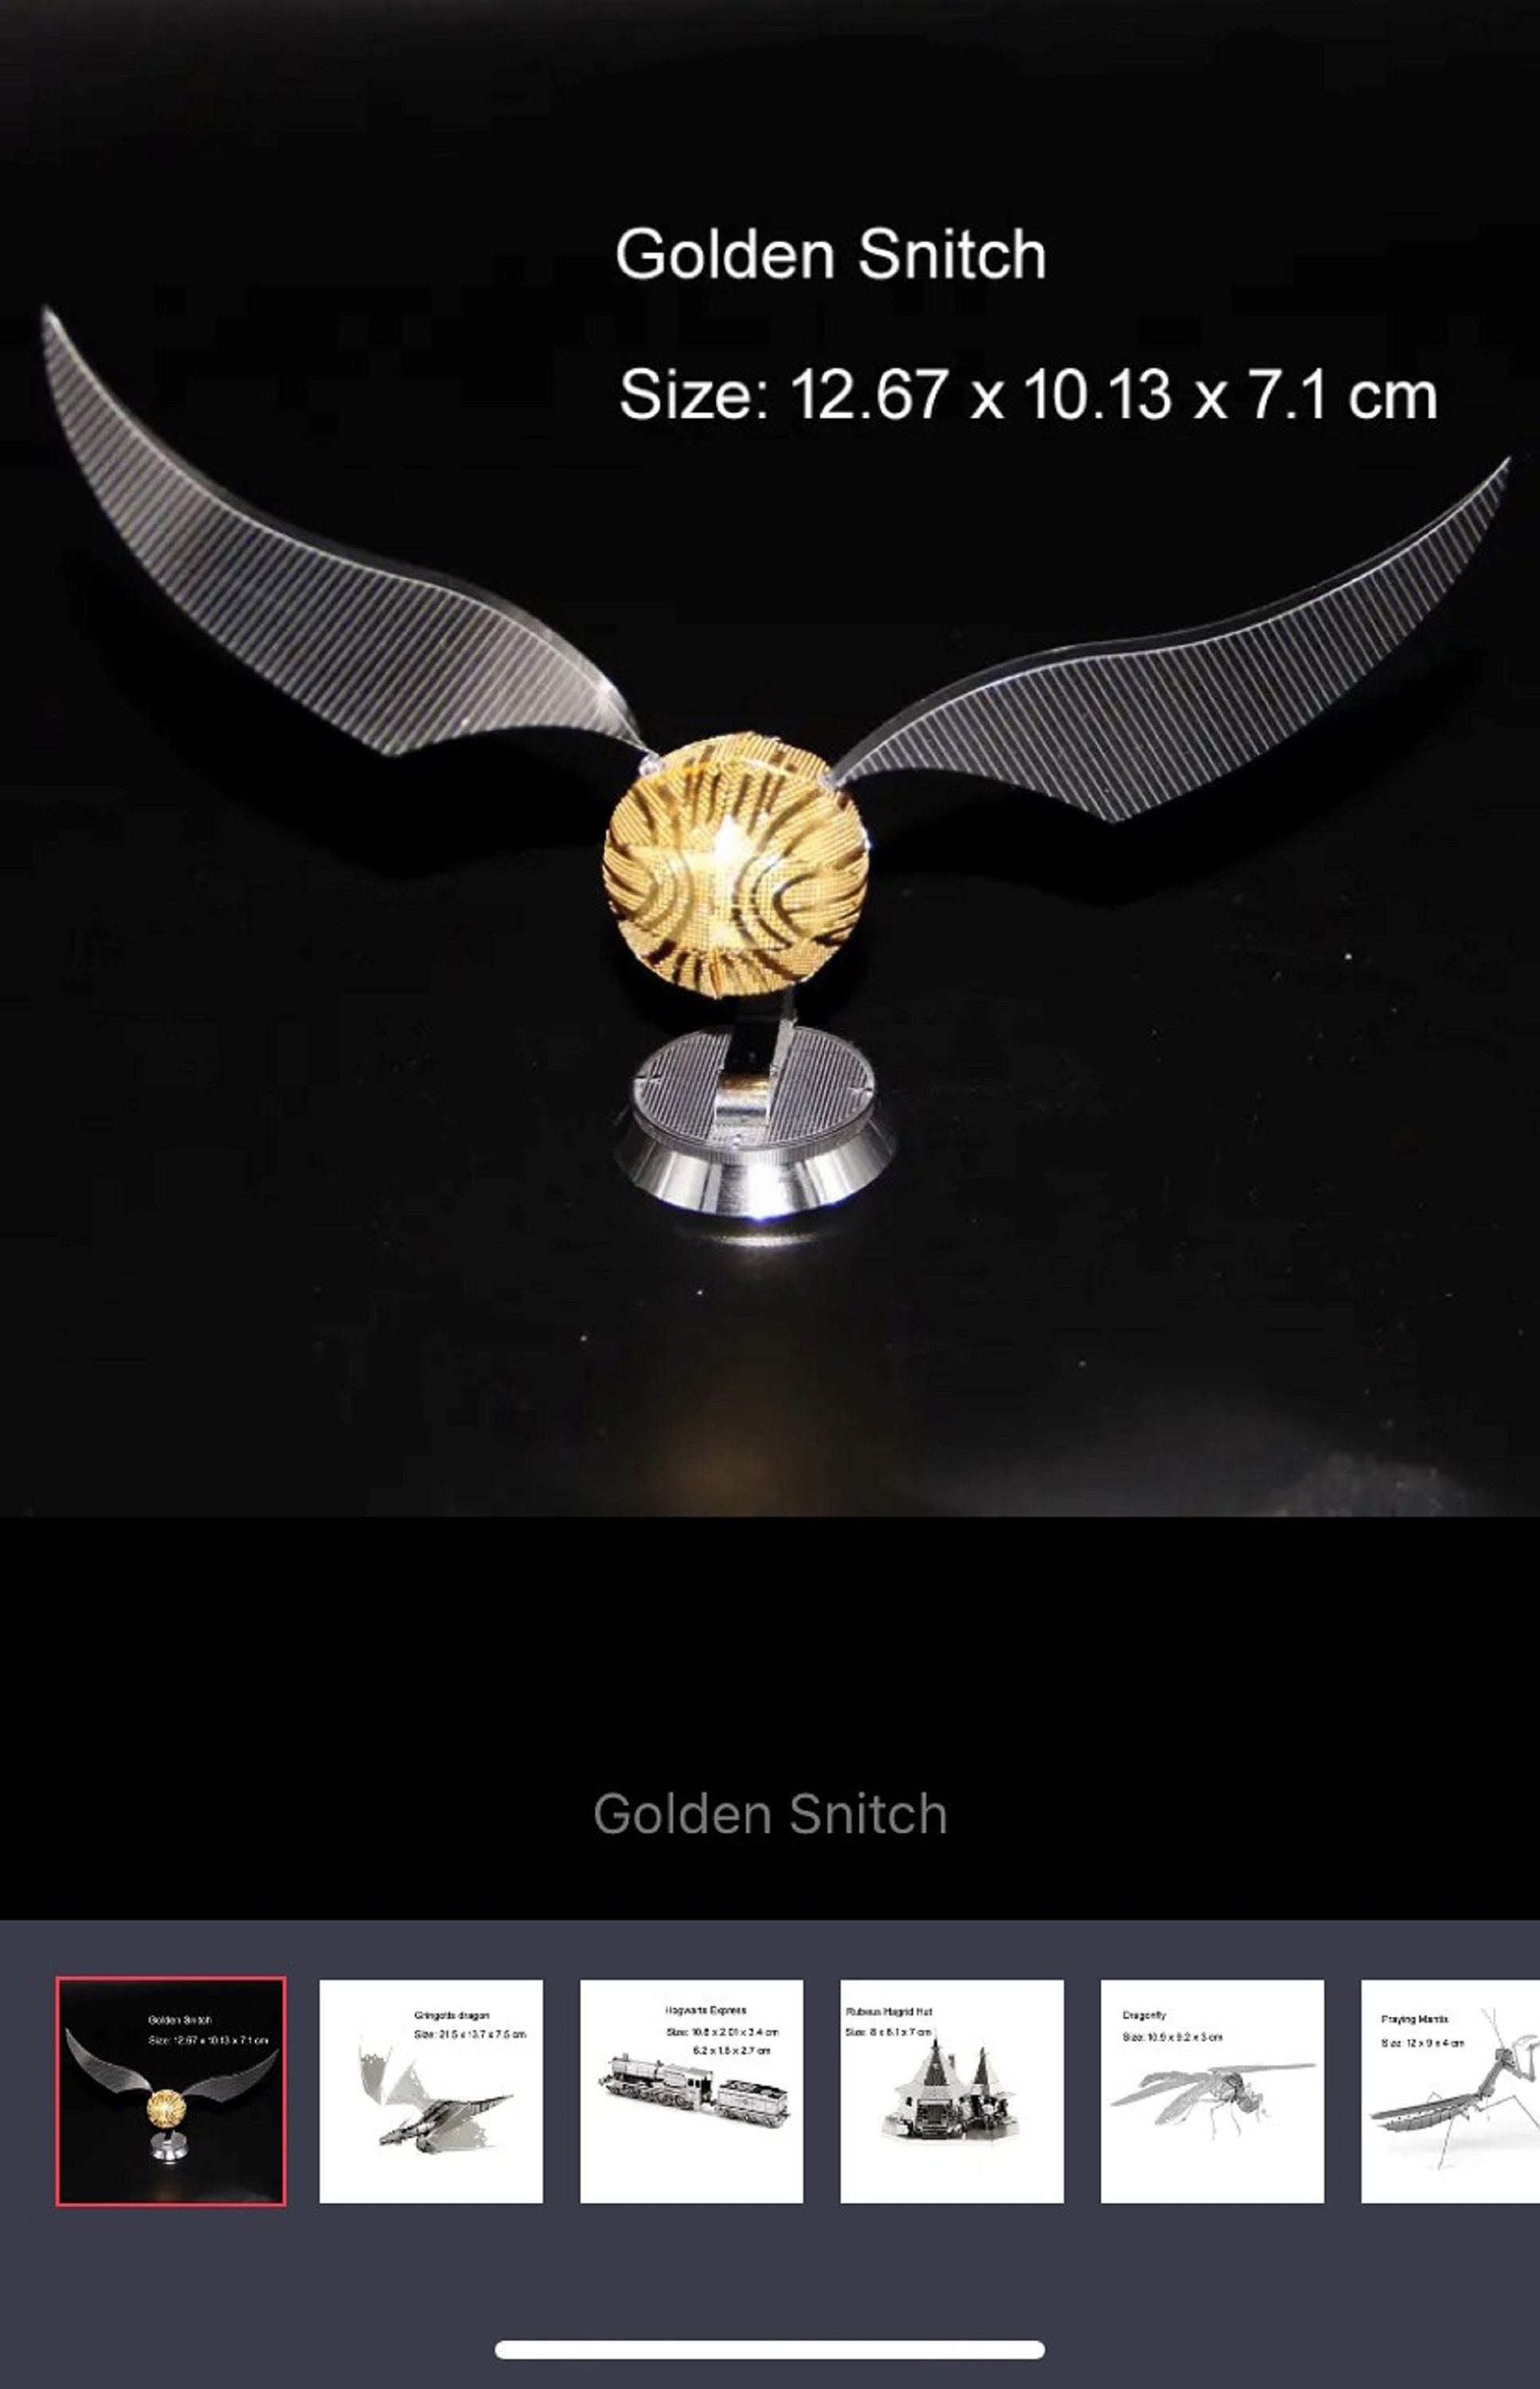 Officially Licensed Sterling Silver Harry Potter™ Golden Snitch Ring Box  display Version by Freeman Jewelry 